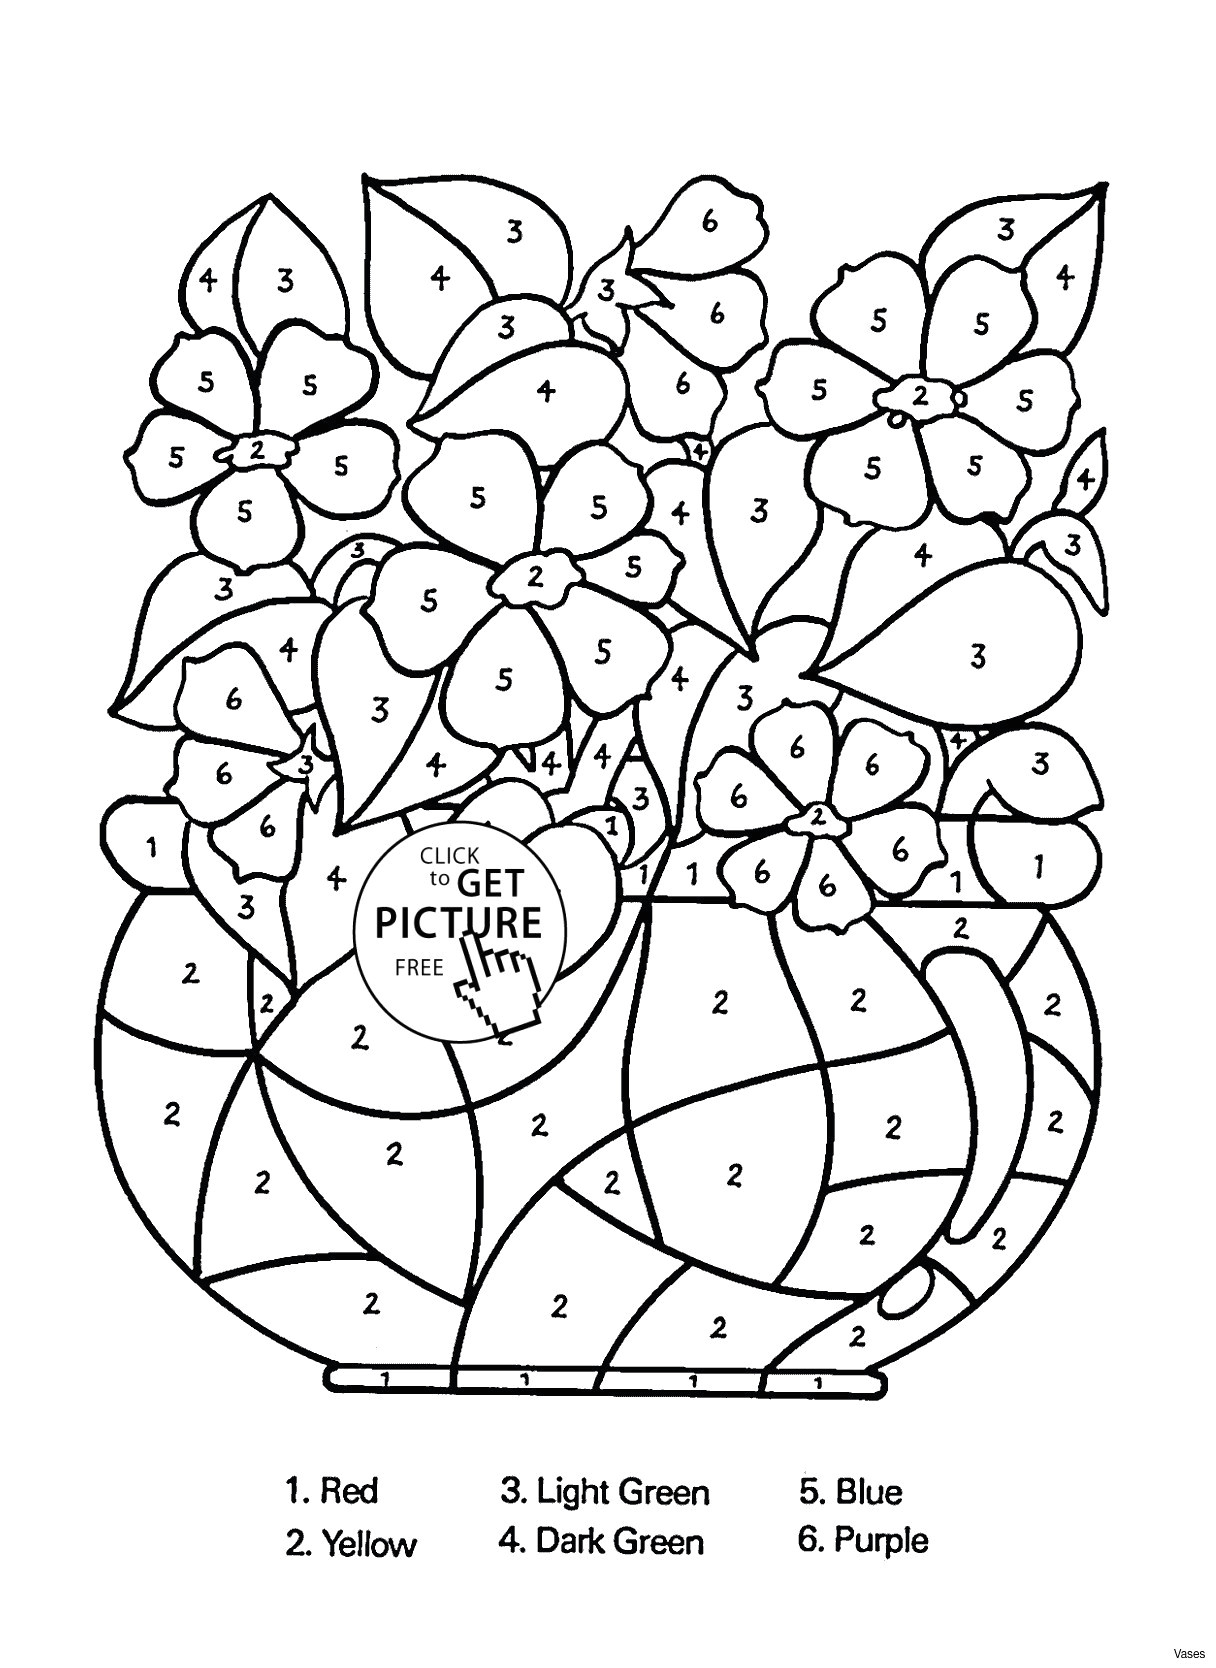 Drawing Of Easy Flower Pot Flowers to Draw Easy Step by Step Flower Pot for Drawing Sketches